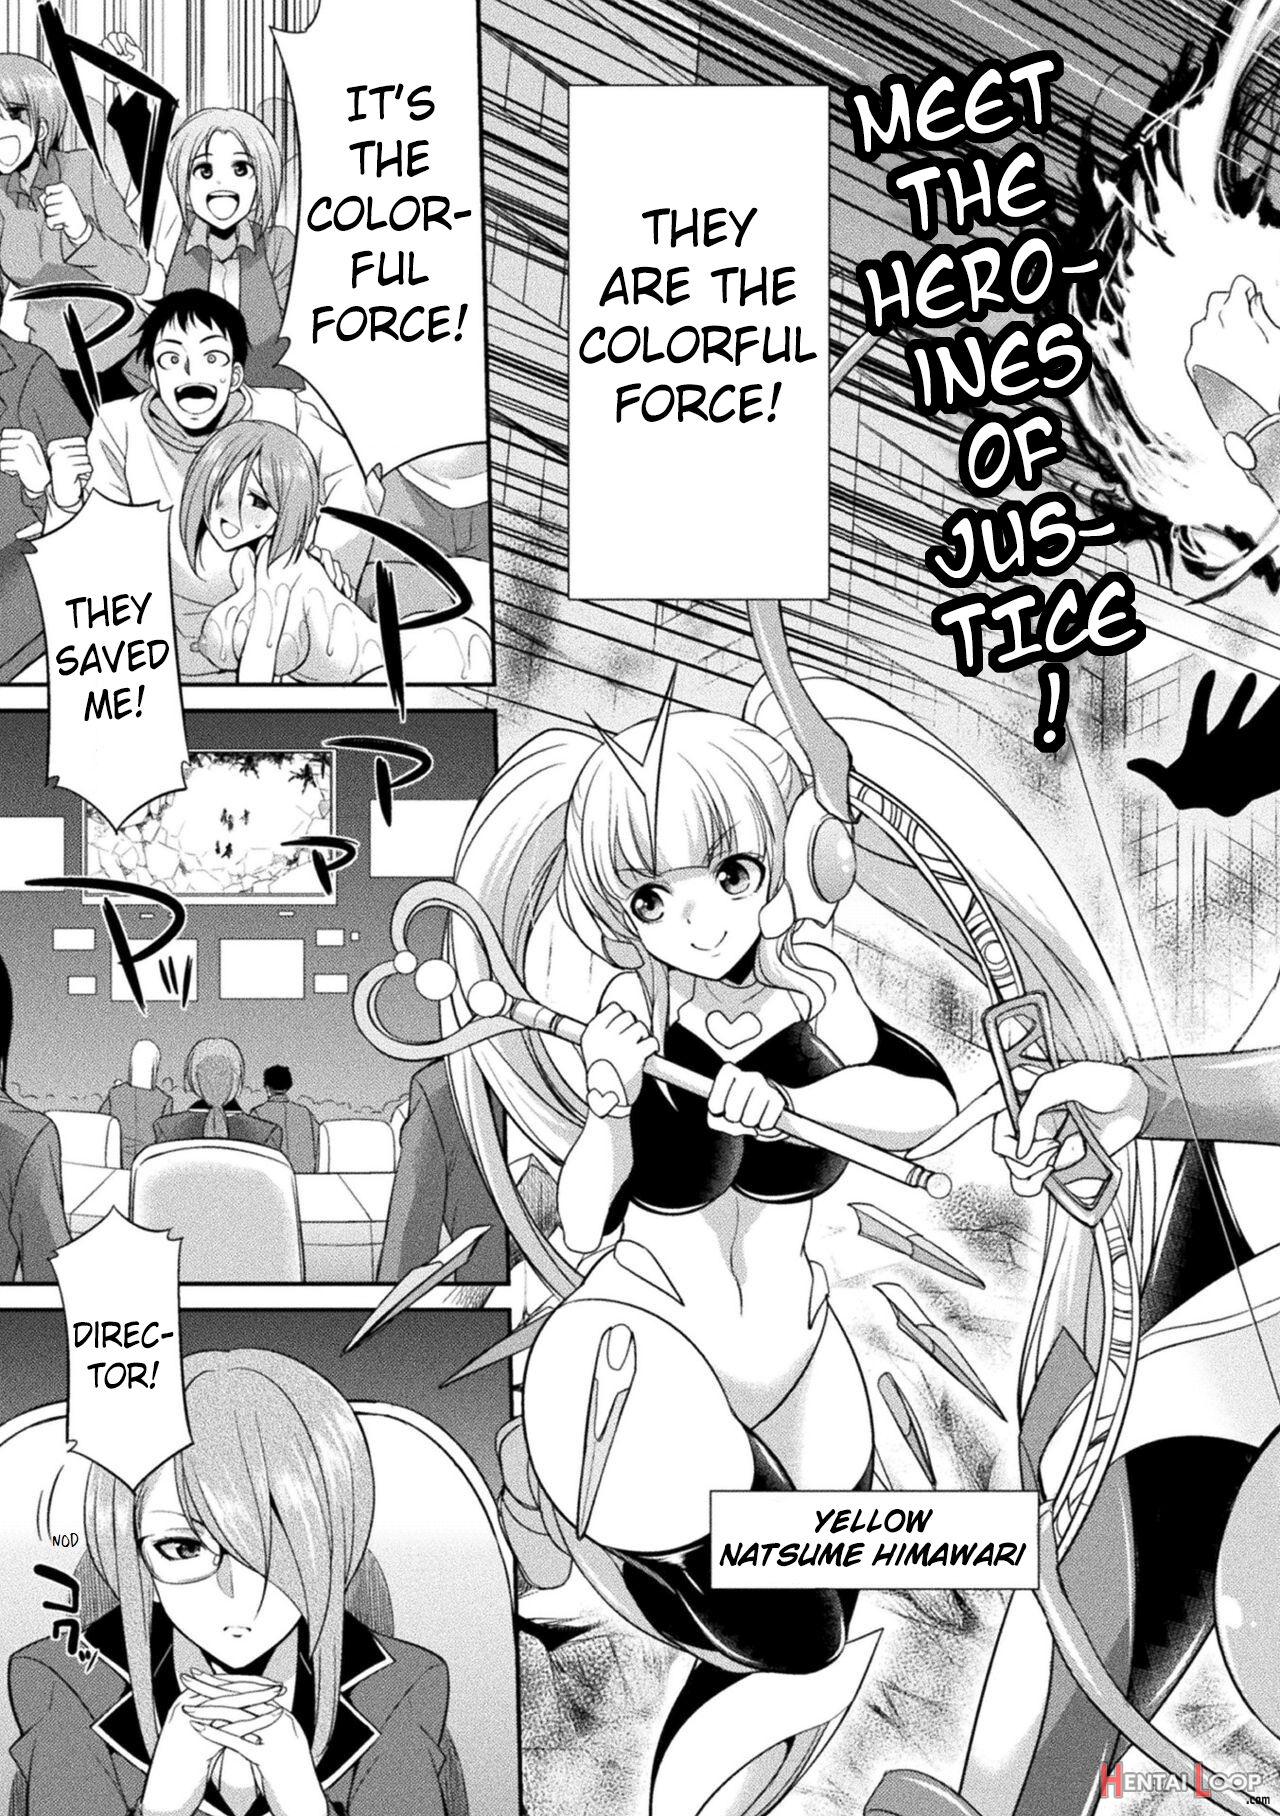 Special Duty Squadron Colorful Force Heroines Of Justice Vs The Tentacle Queen! The Great Battle Of Futa Training!? page 7